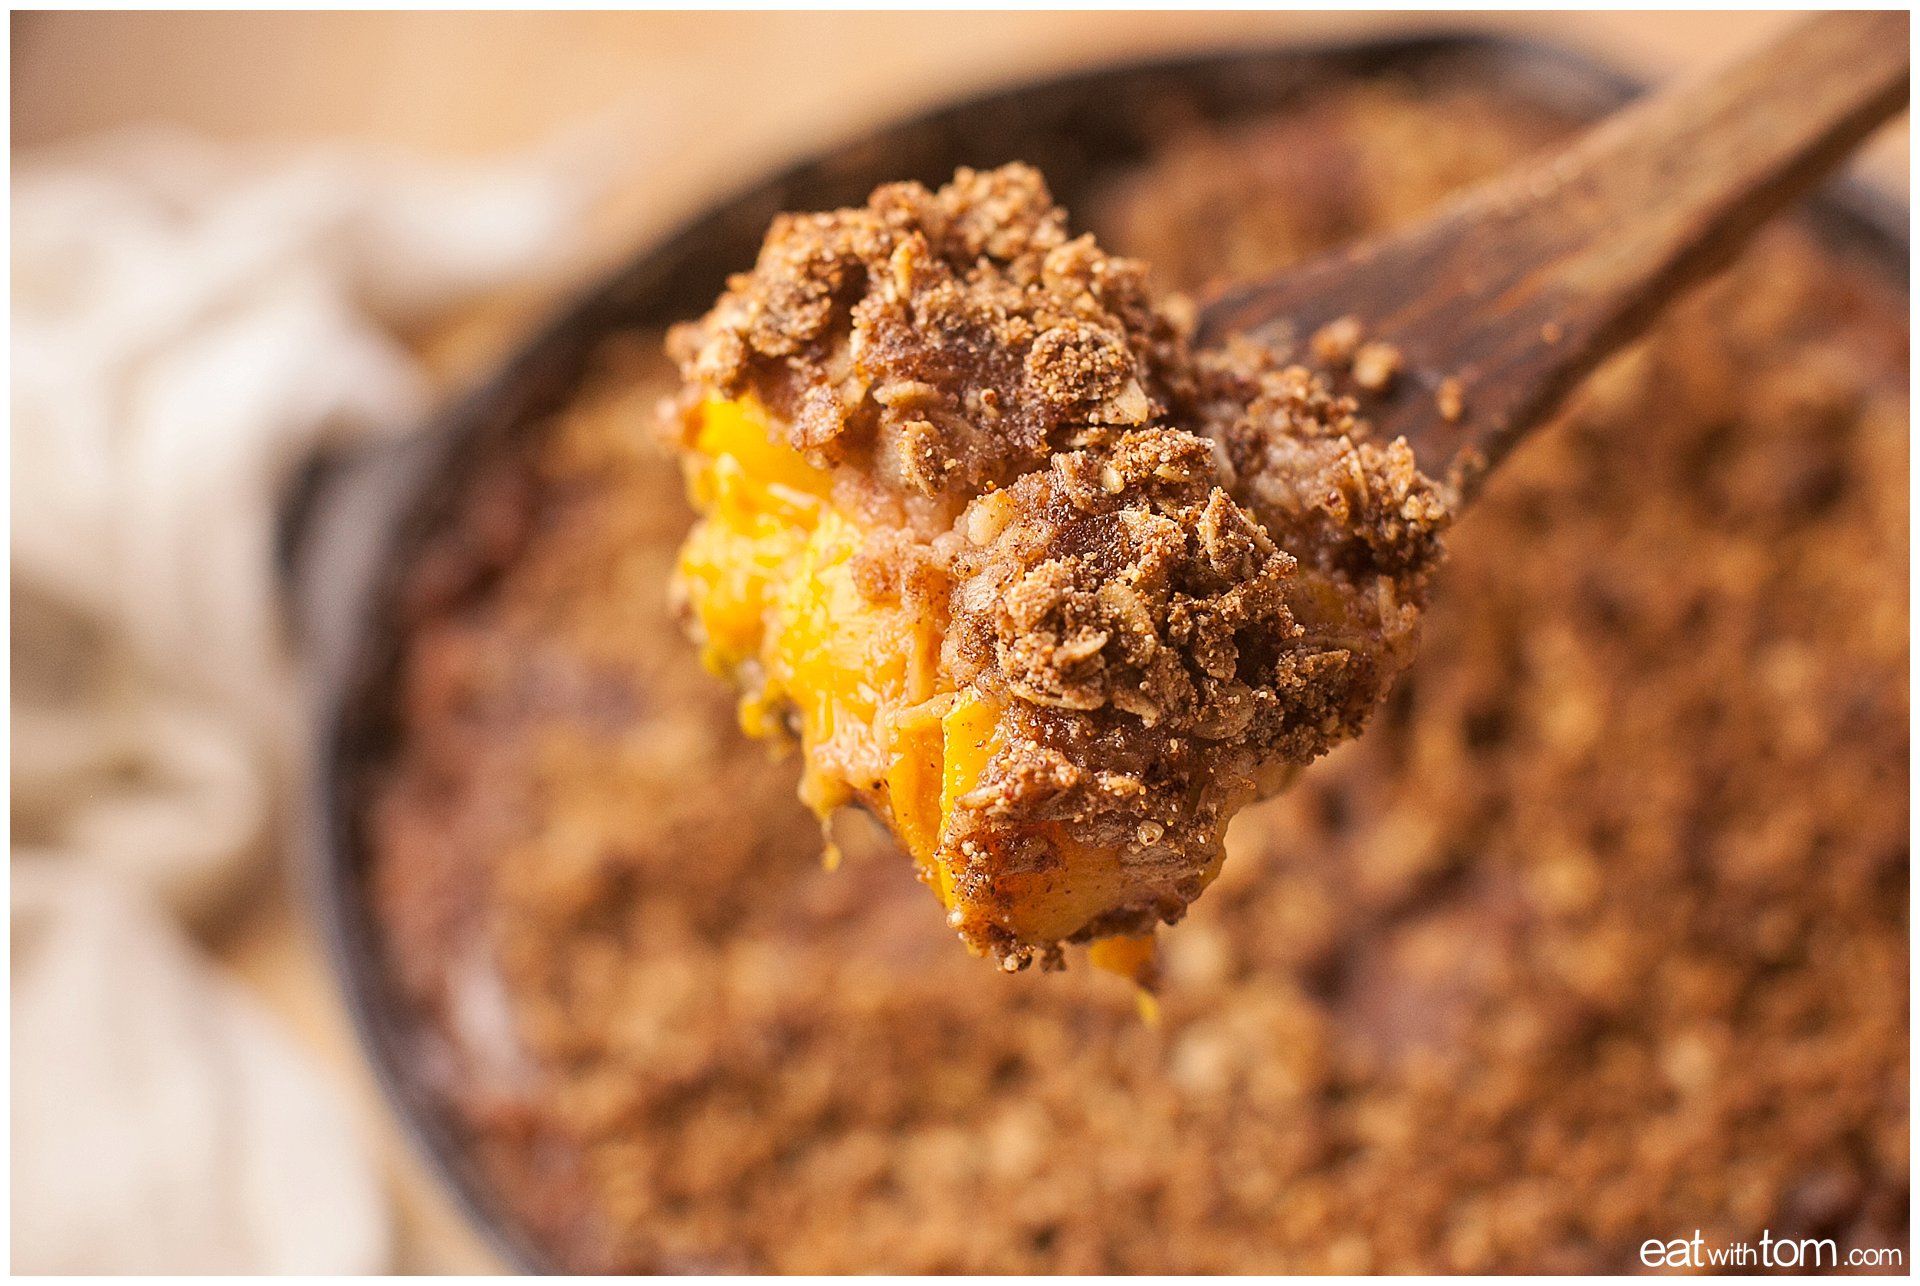 Peach quinoa crumble dessert recipe - Eat with Tom in Chicago - Food blog for the new food culture